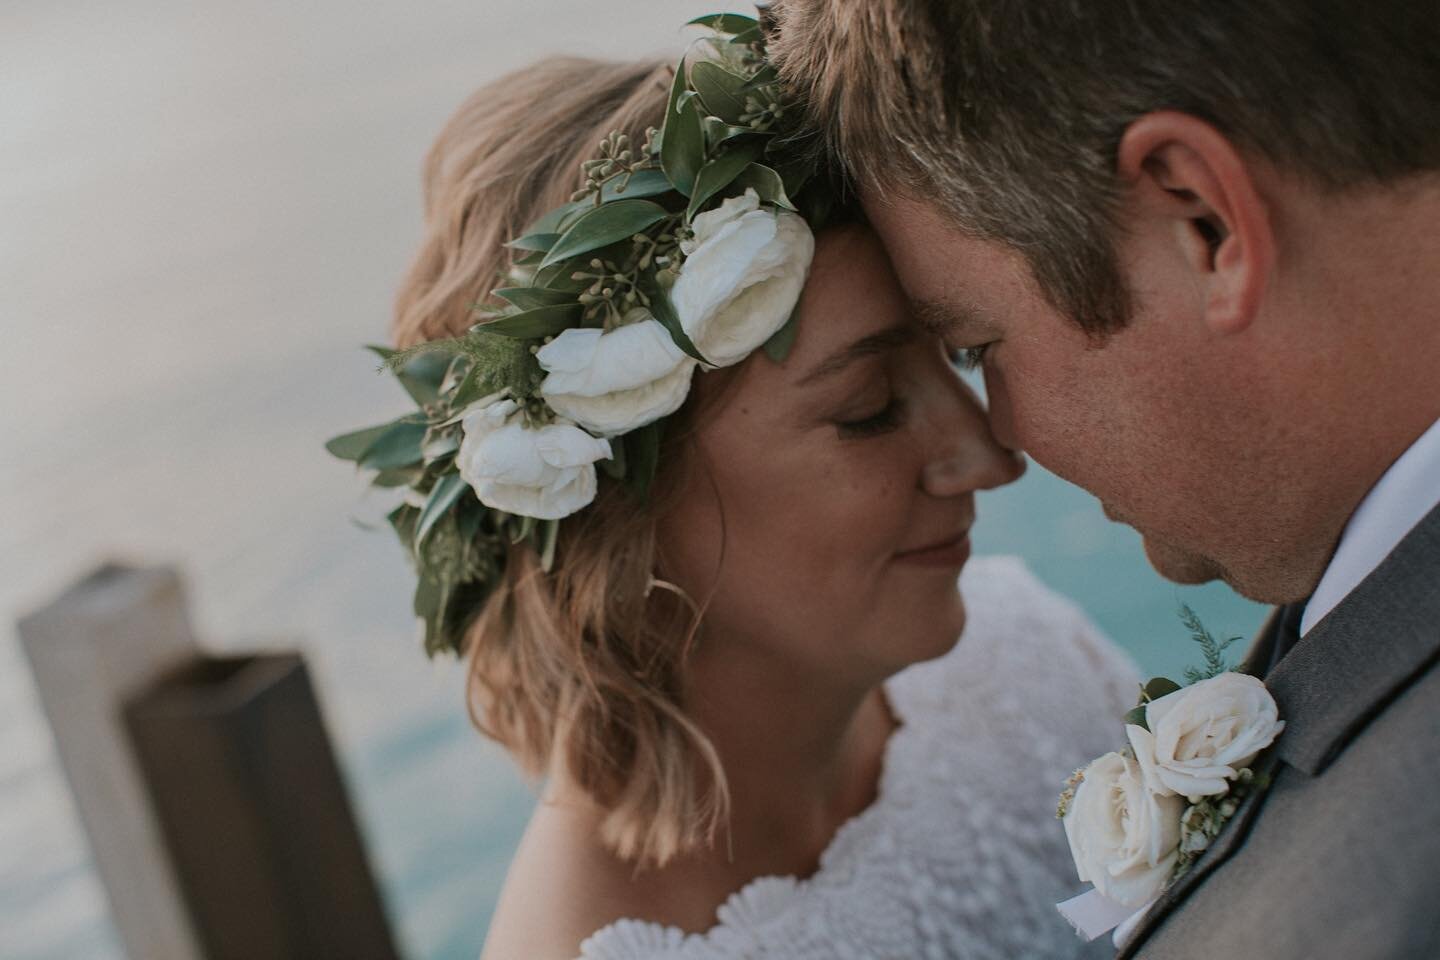 The connection between these two is undeniable. The amount of love they have for each other made for some beautiful photos. 
#lifestyleweddingphotographer #explorecreate #journalwedding #michiganweddingphotographer #loveauthentic